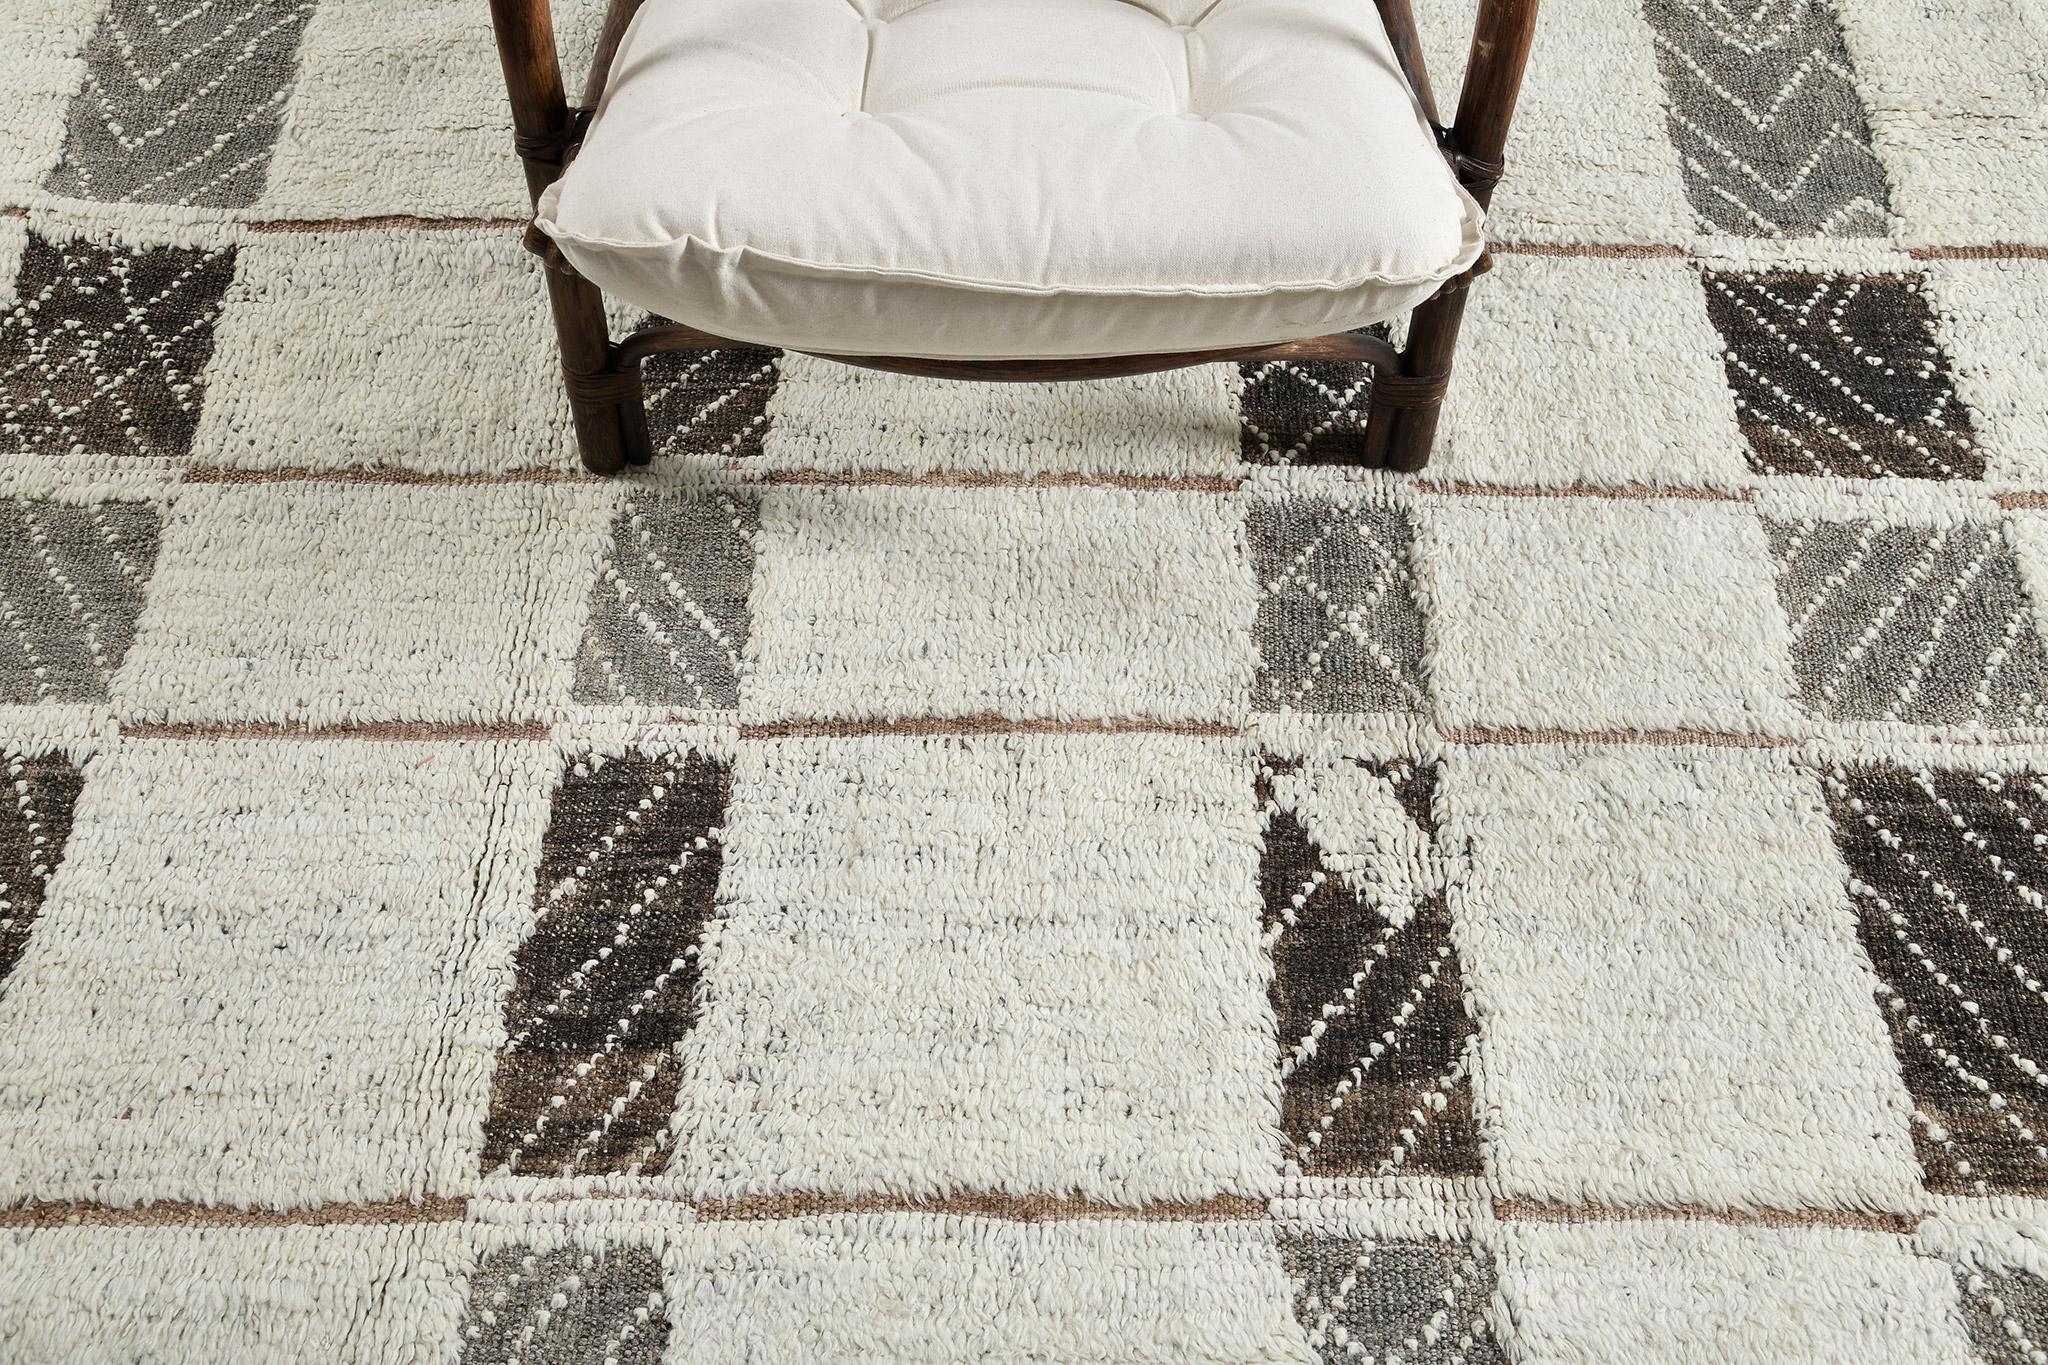 Tavsot’ in Nomad Collection features stunning optical lozenge backdrop overlaid with rectangular ivory patches. Its perfect neutral scheme of gray, mocha and ivory is well suited for minimalist interiors. Cozy and sophisticated, this mesmerizing rug